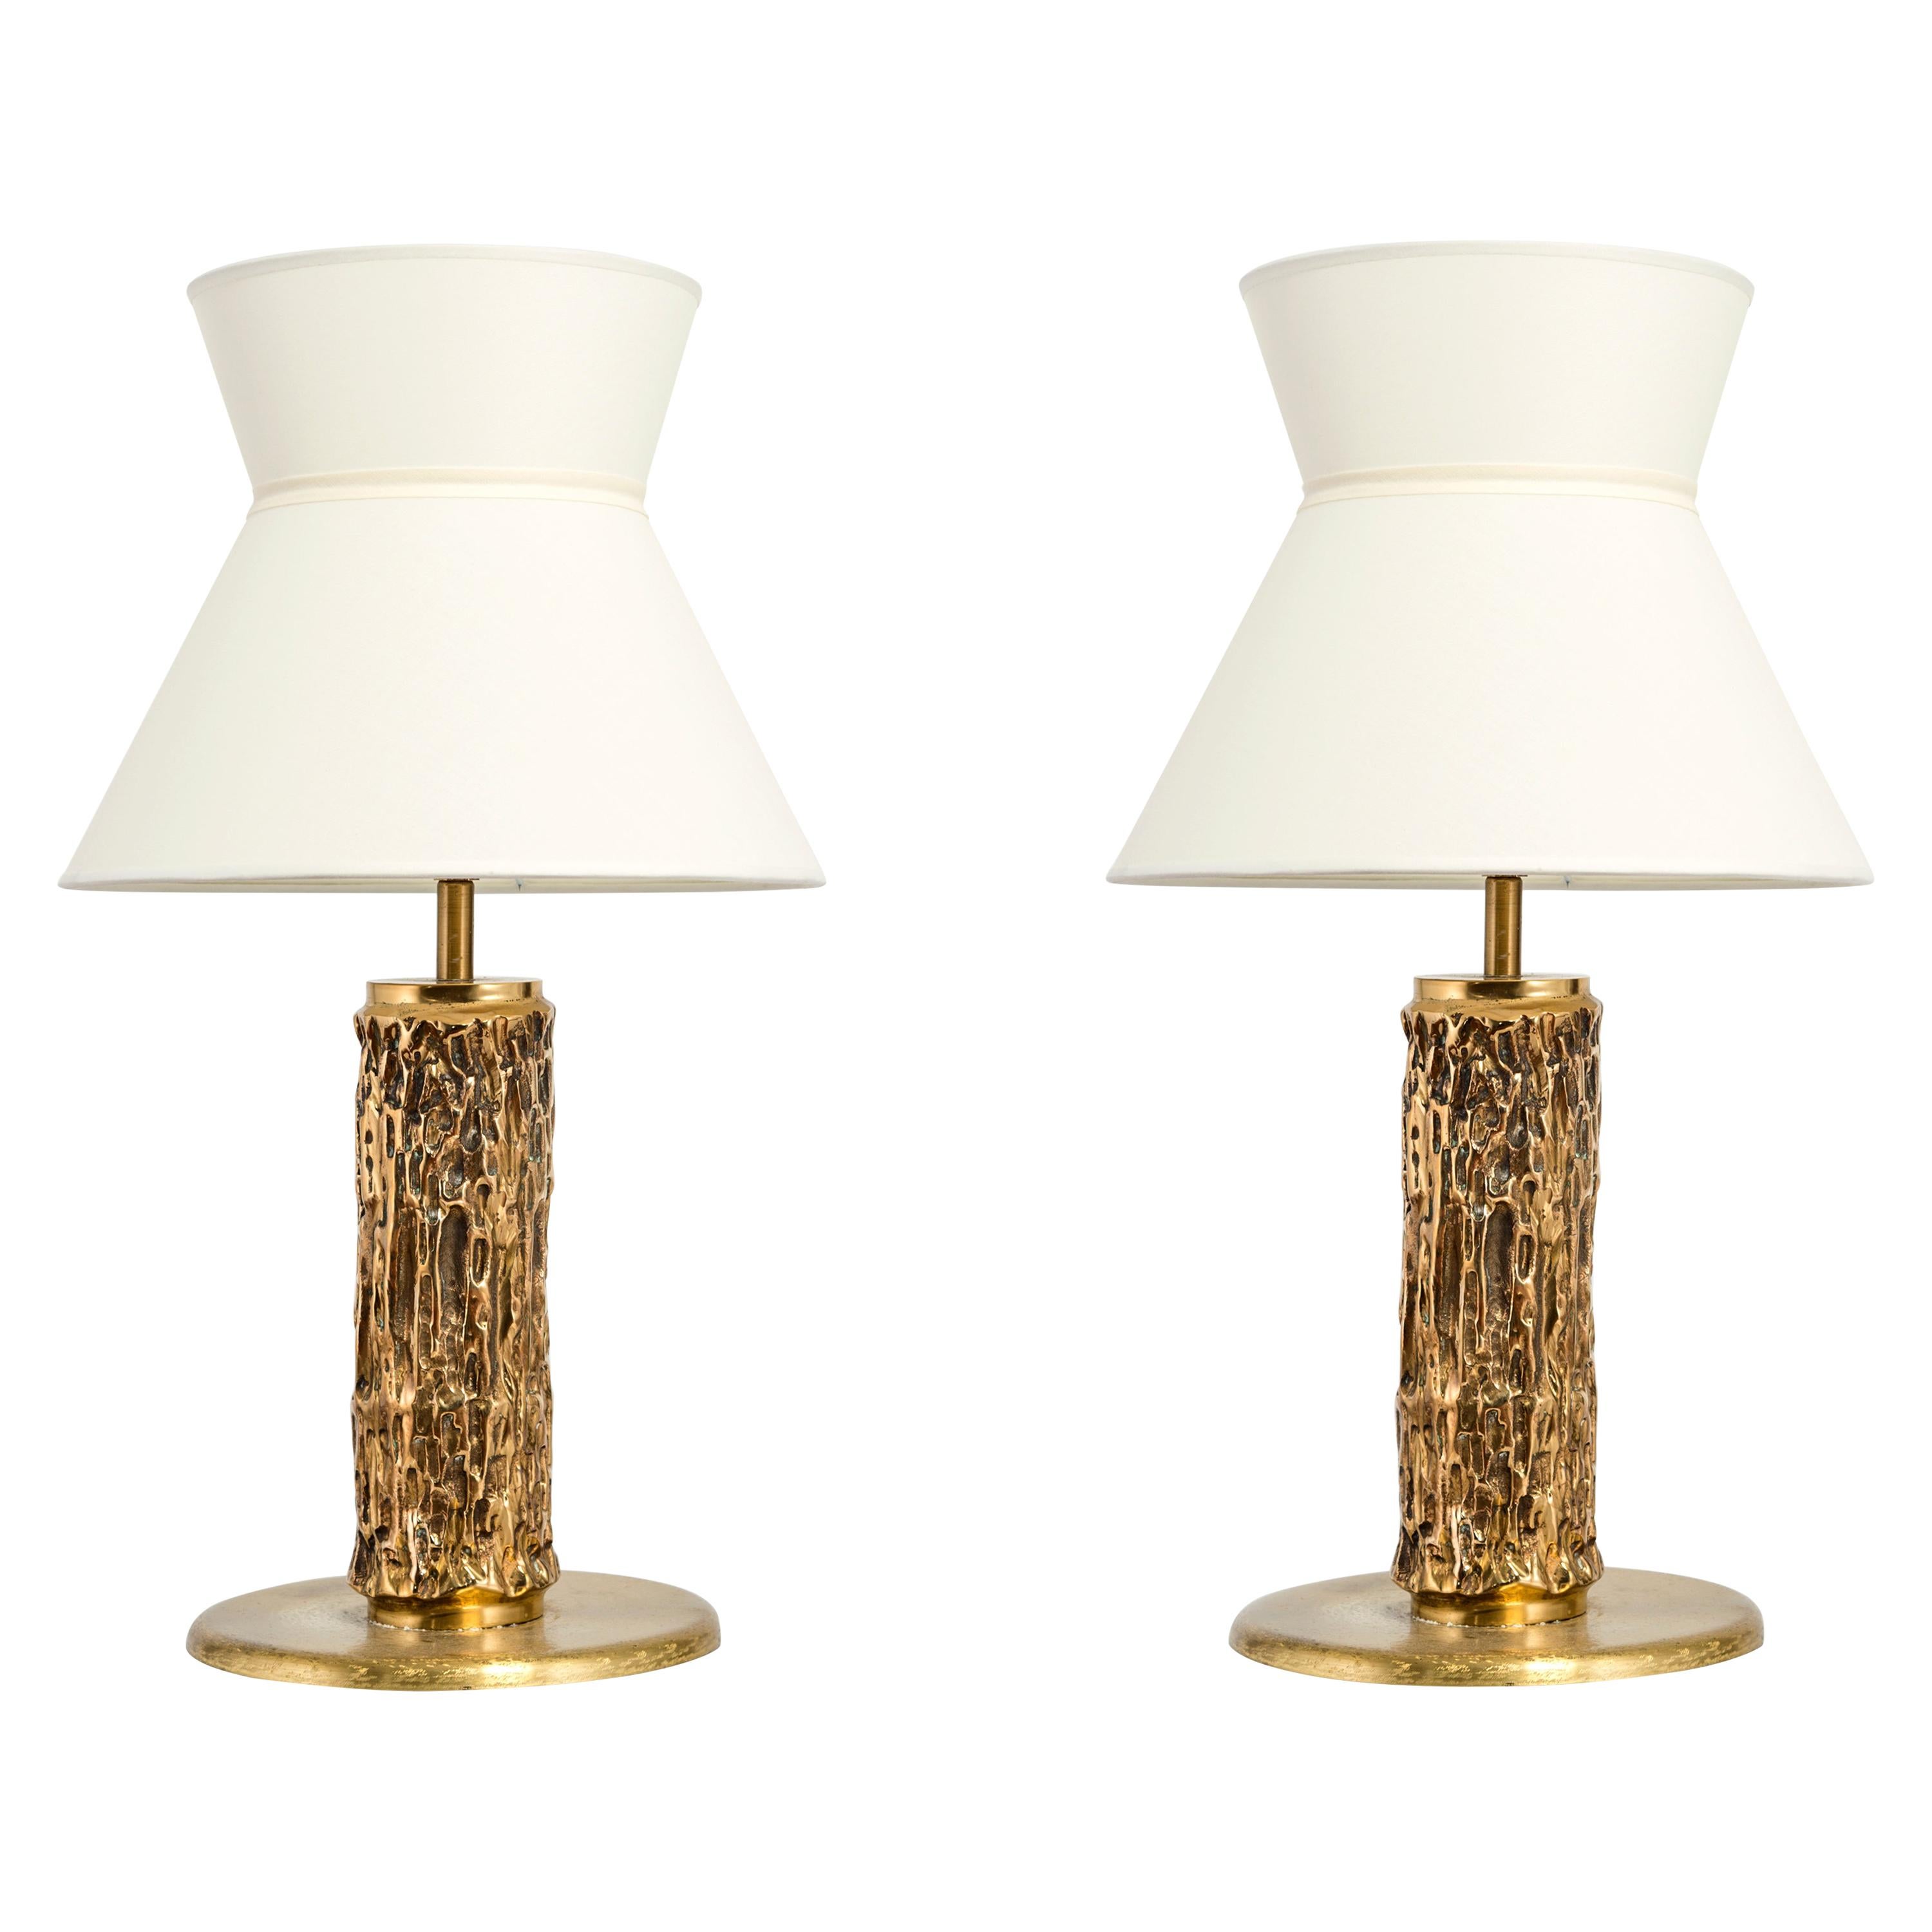 Pair of Bronze Table Lamps by Luciano Frigerio, Italy, 1980s